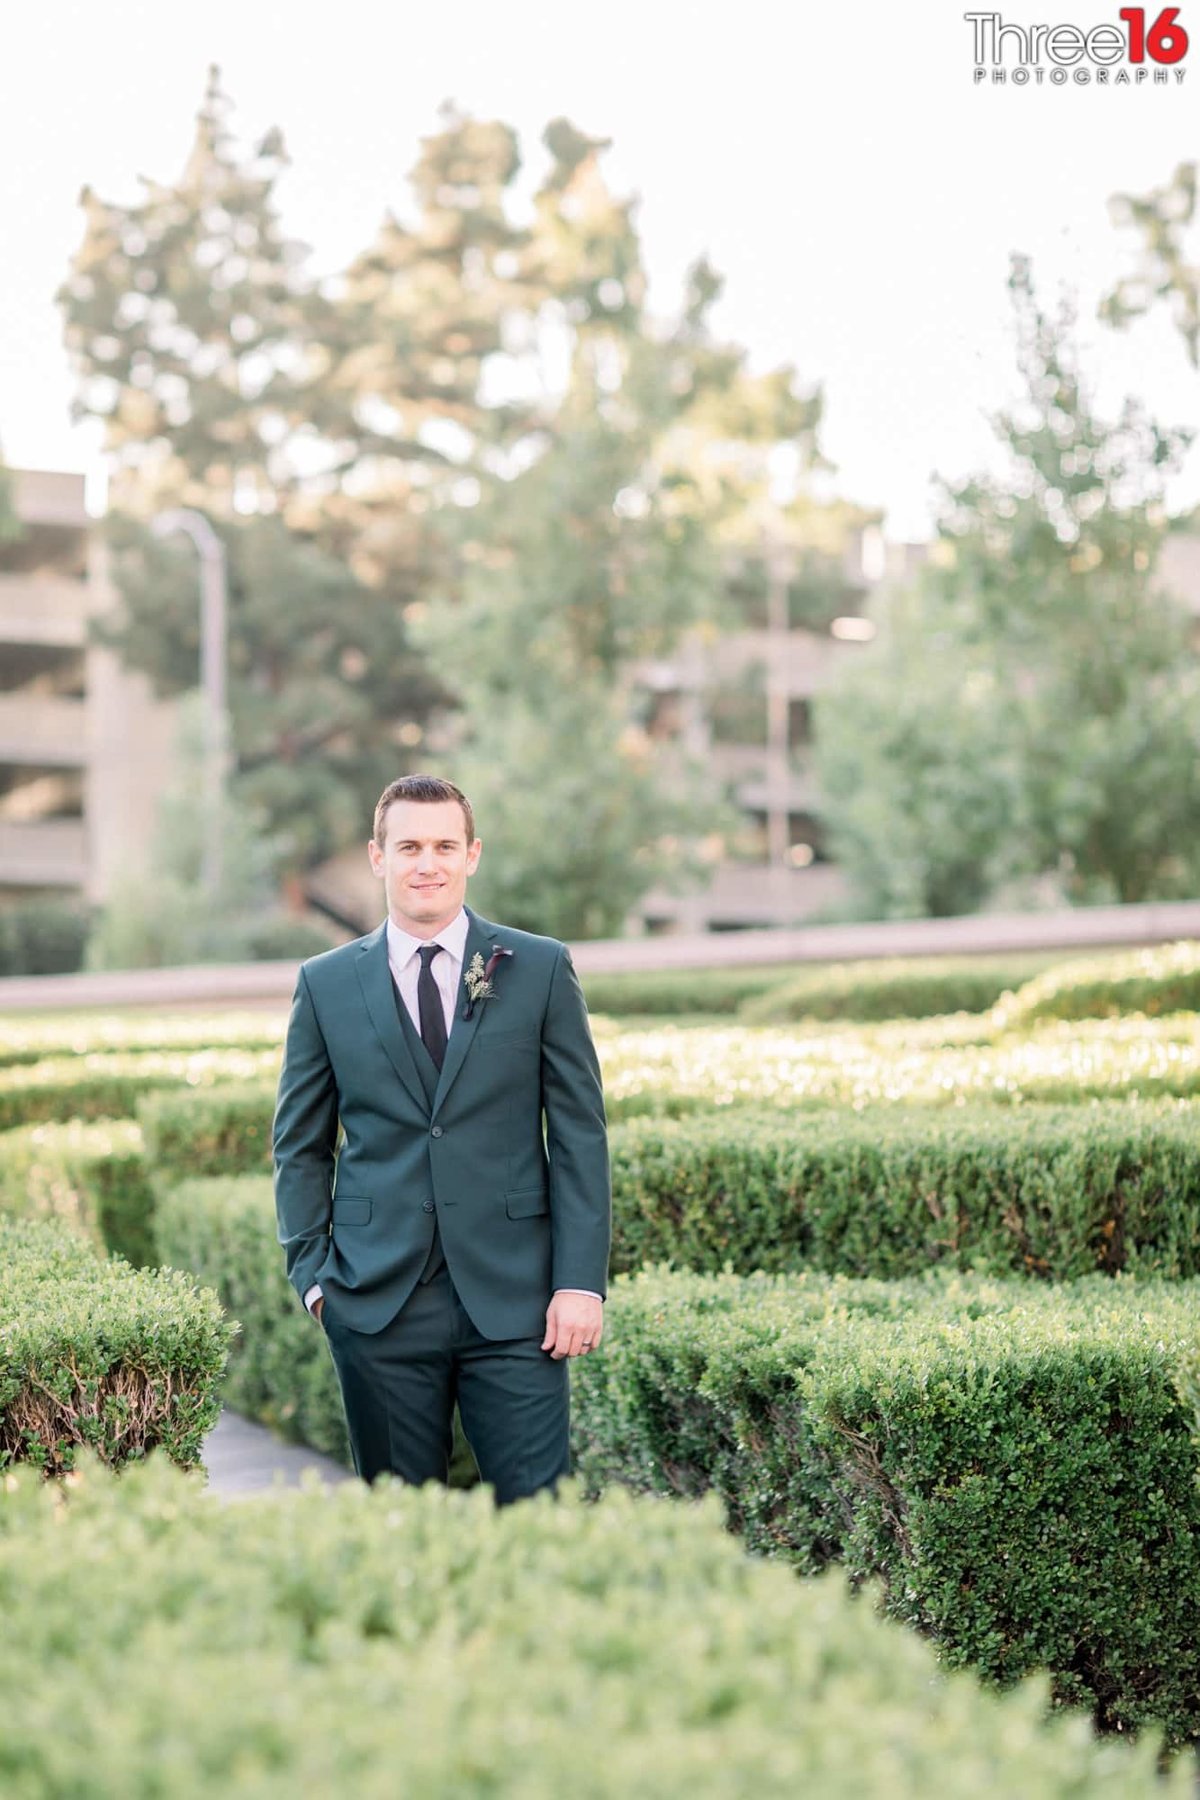 Groom poses for photos amongst the bushes at the Center Club in Costa Mesa, CA